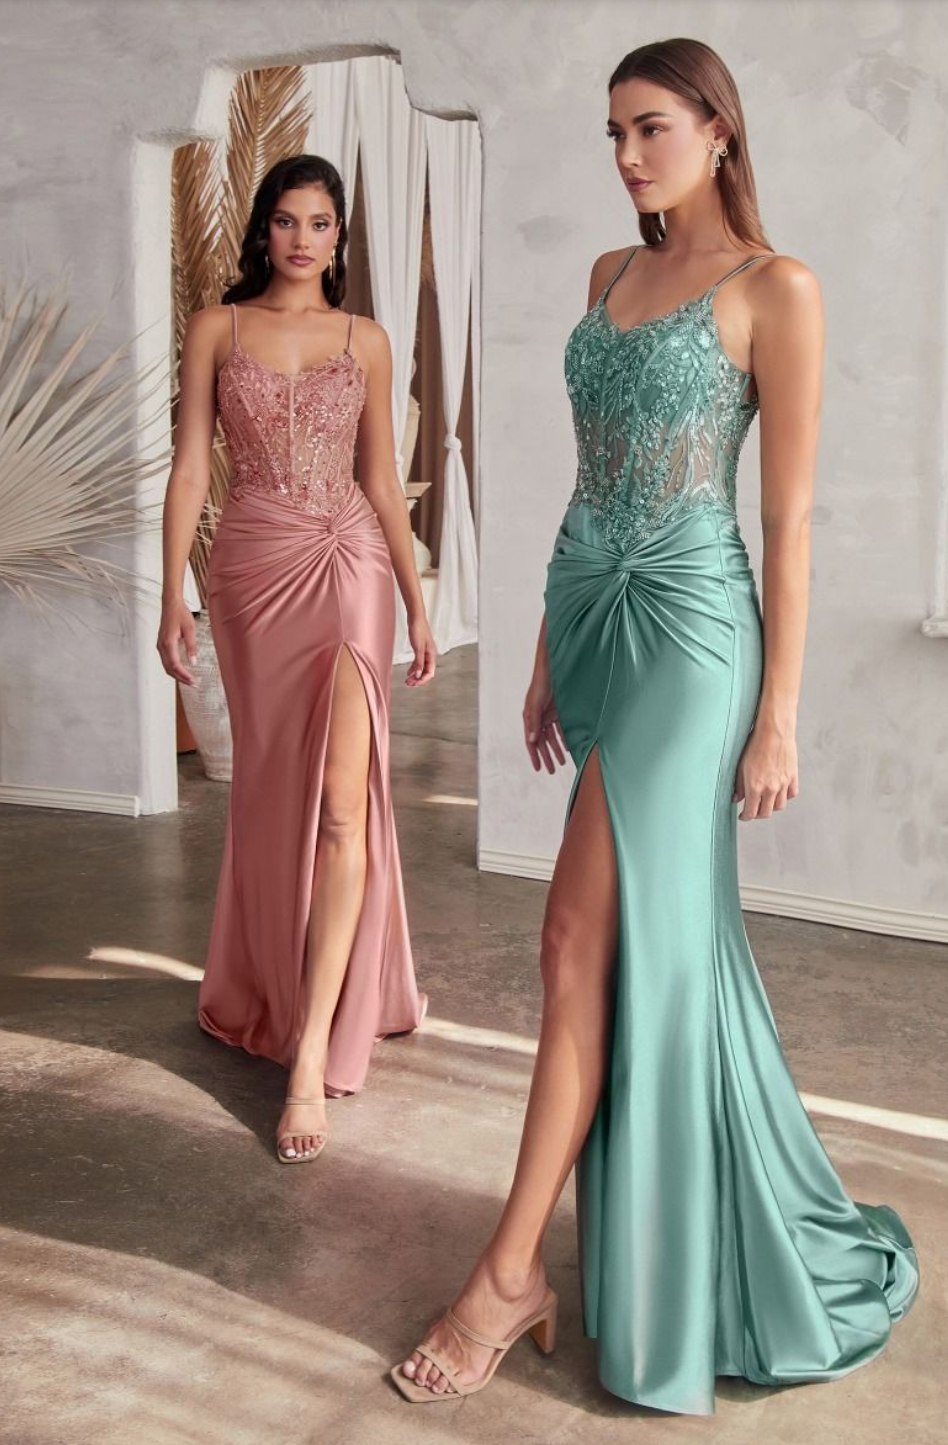 7 COLOURS AVAIBLE - FITTED SATIN GOWN WITH EMBELLISHED BODICE